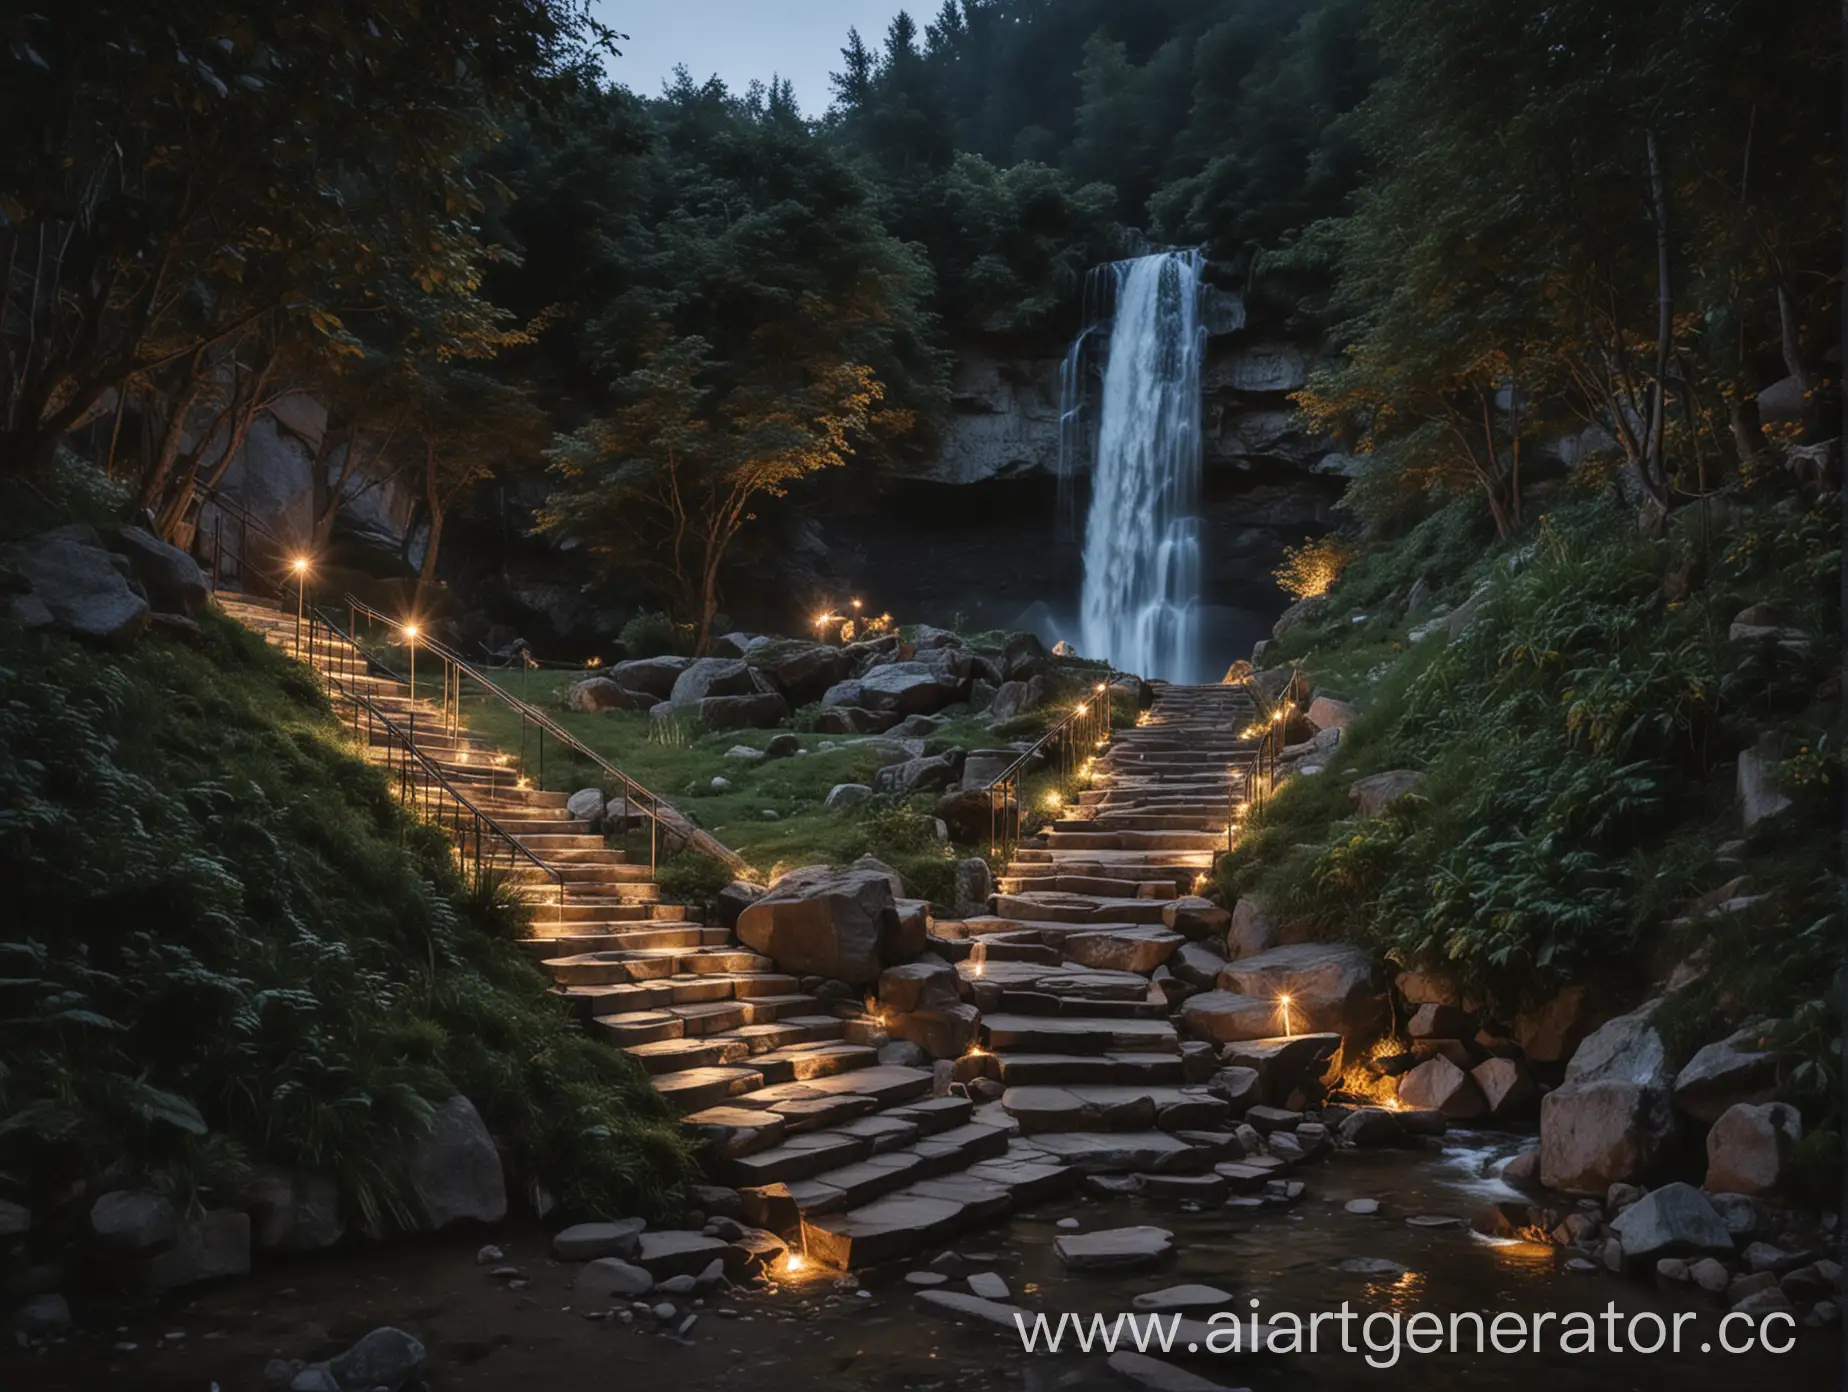 Scenic-Hilltop-Staircase-with-Cascading-Waterfall-and-Ambient-Lighting